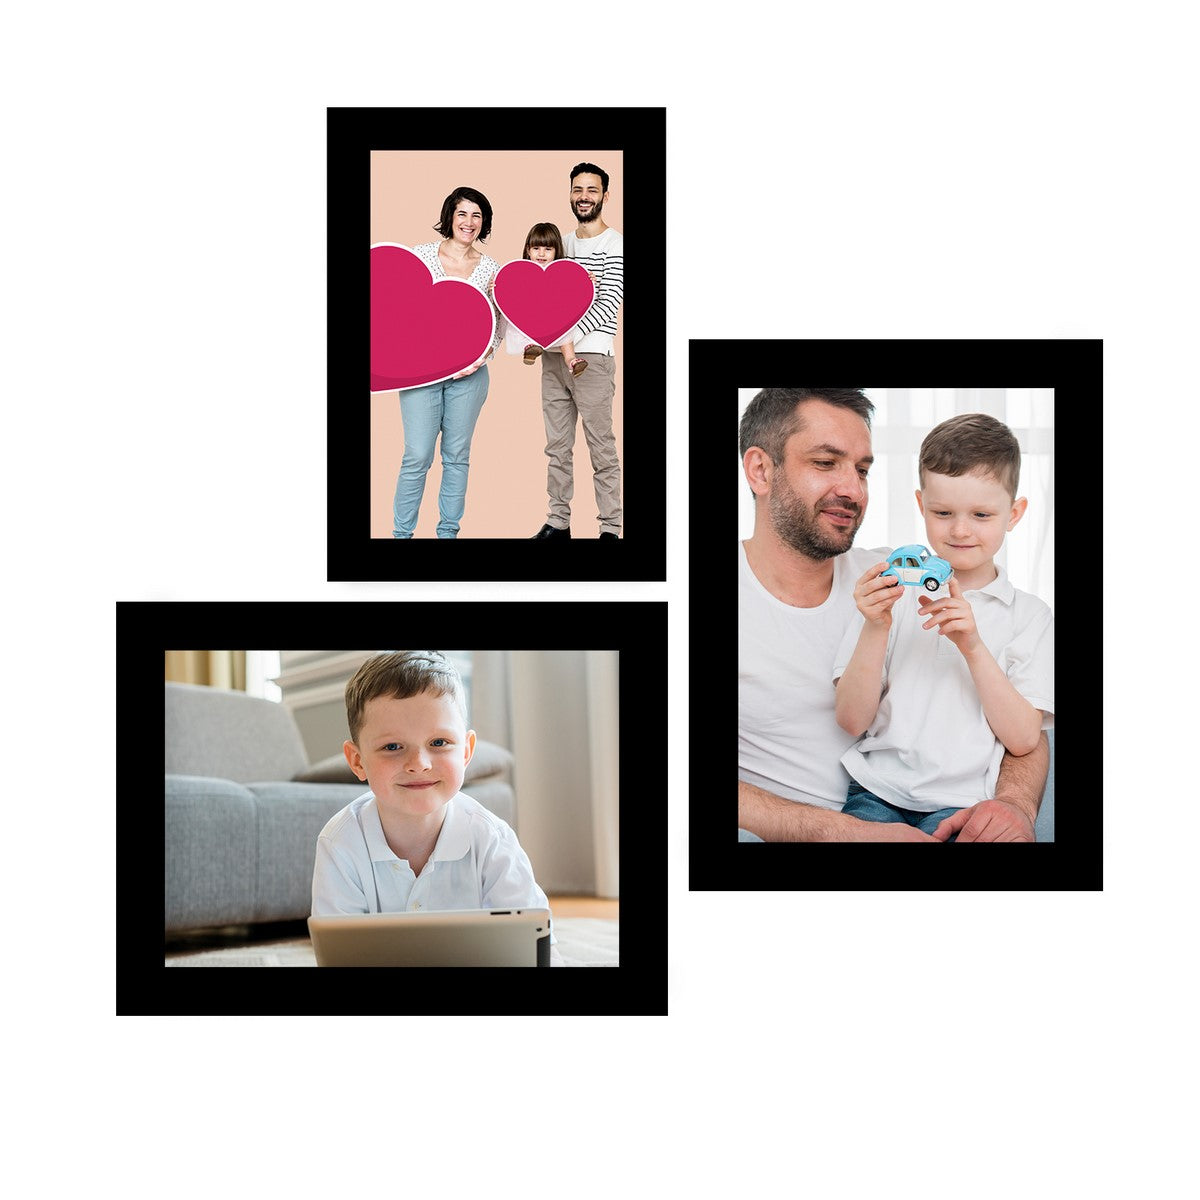 Memory Wall Collage Photo Frame - Set of 3 Photo Frames for 1 Photo of 5"x7" and 2 Photos of 6"x8"